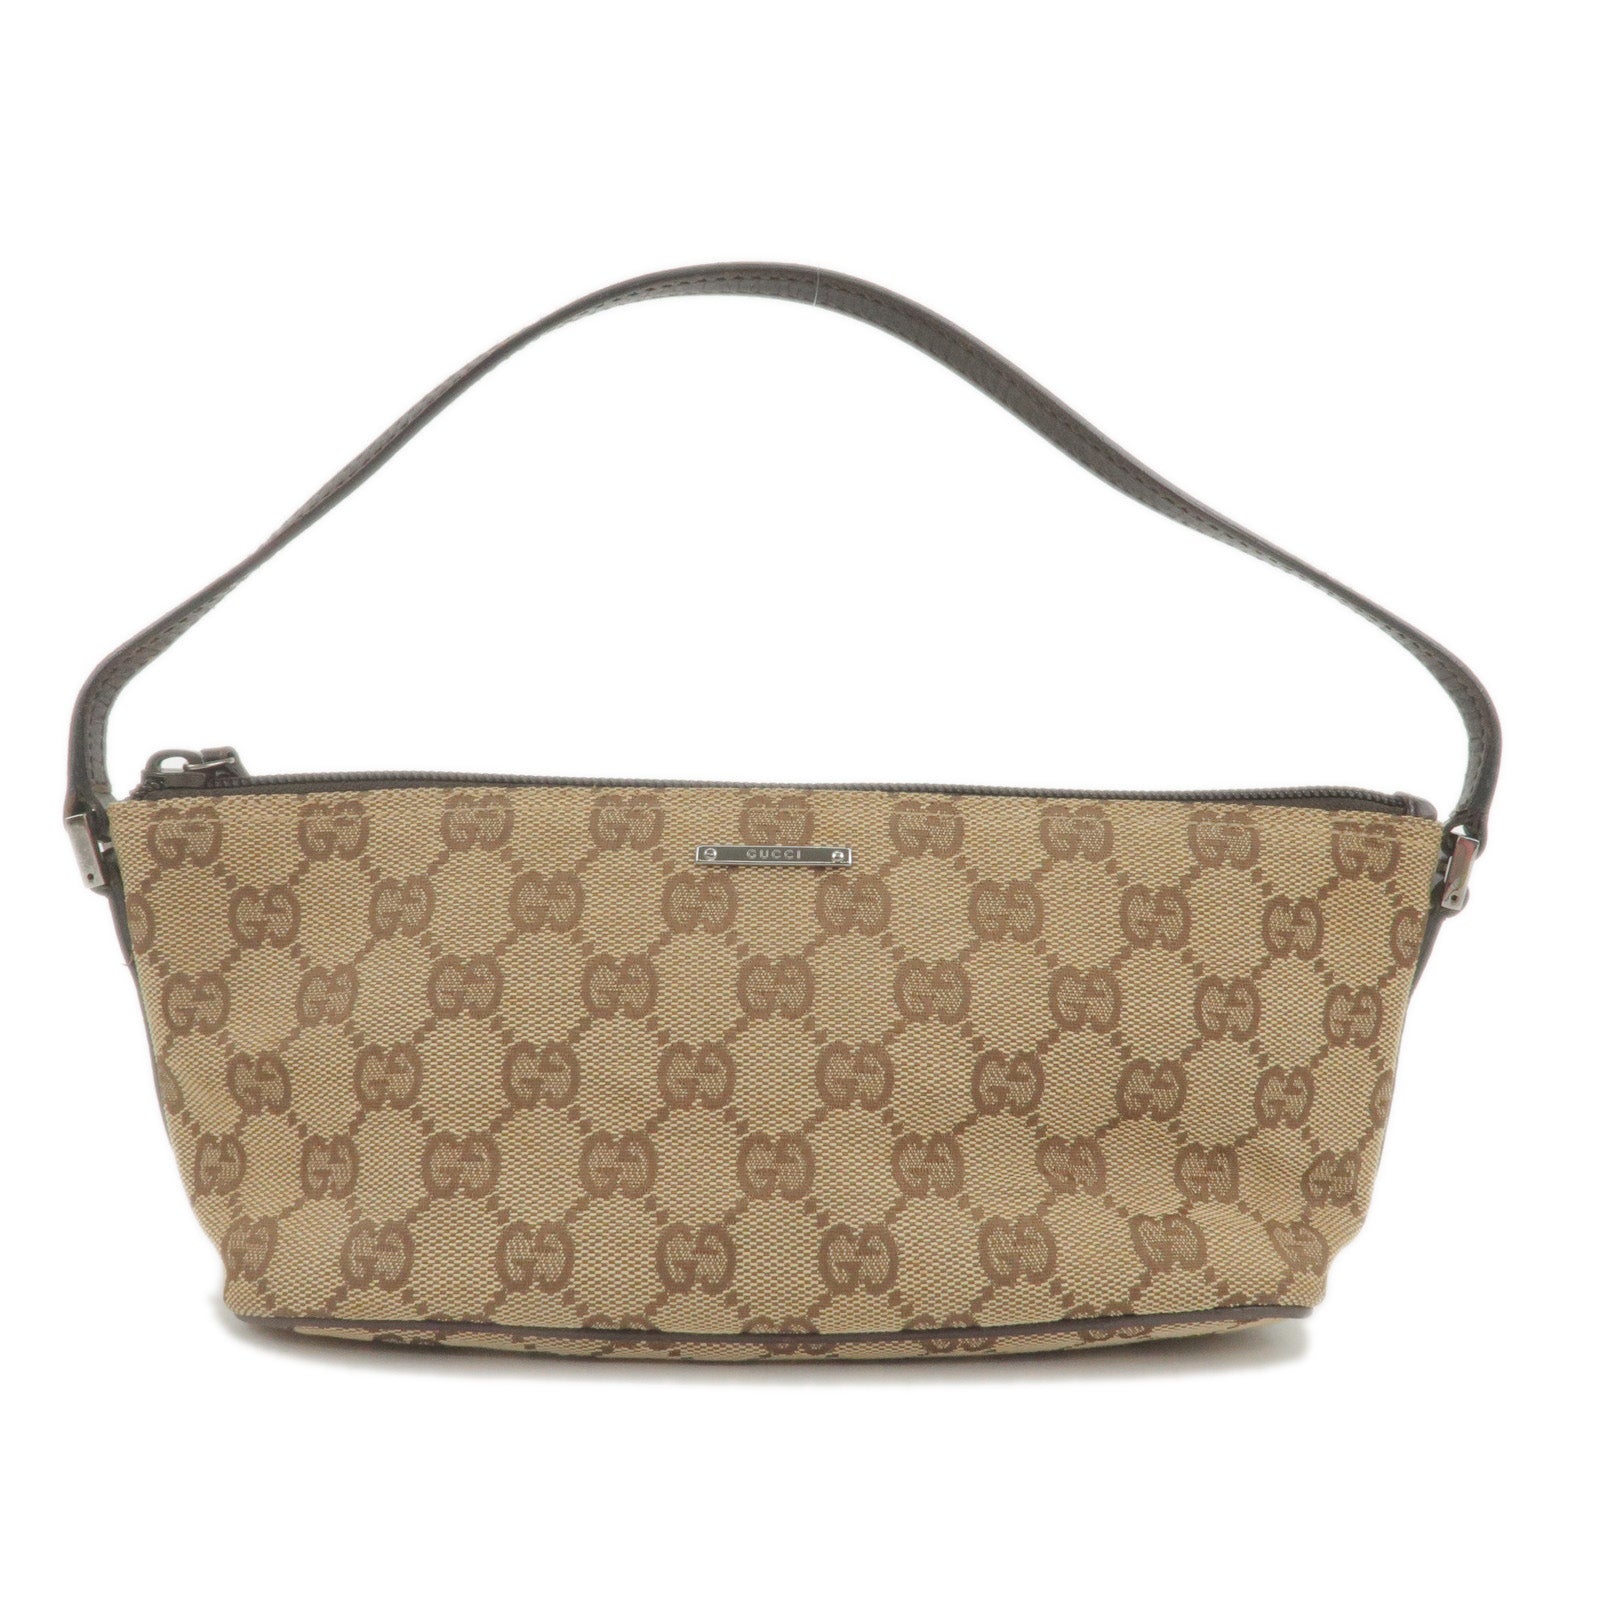 GUCCI-Boat-Bag-GG-Canvas-Leather-Hand-Bag-Brown-Beige-07198